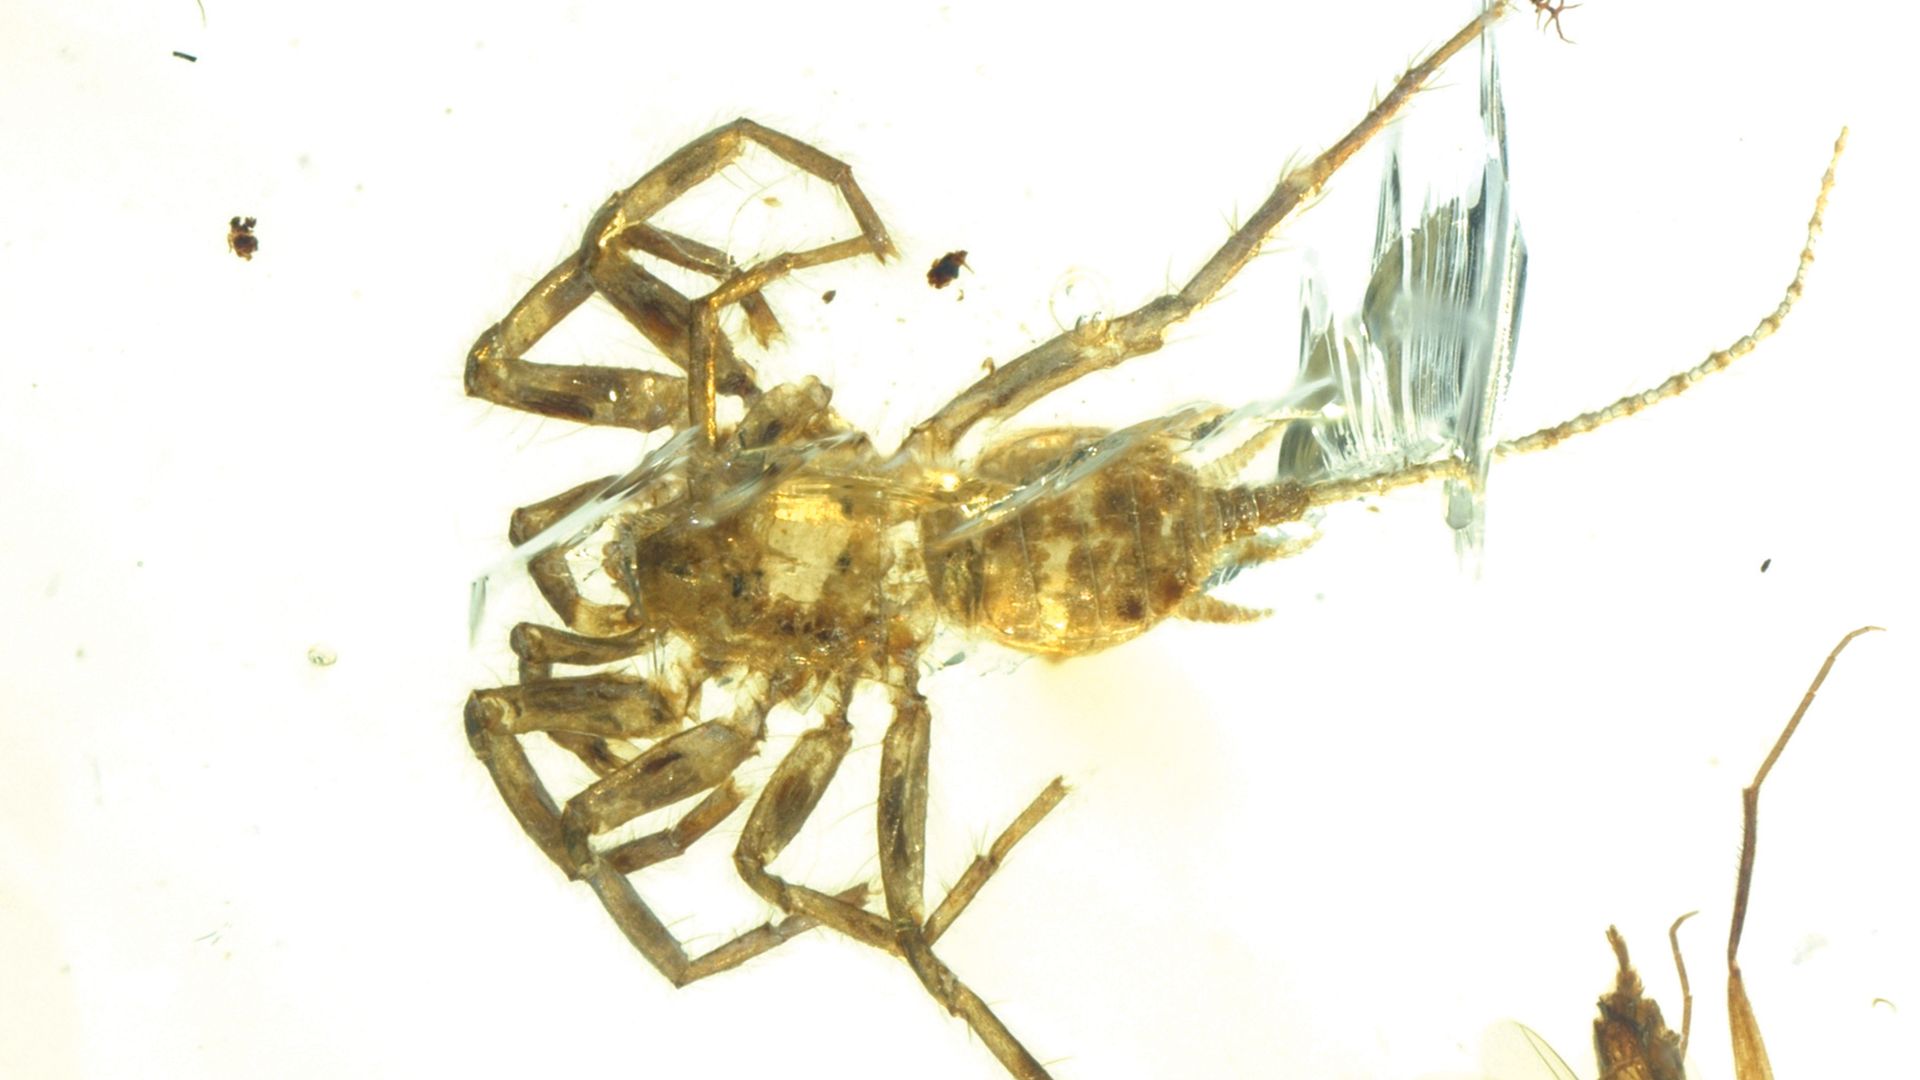 This bizarre creature, found preserved in amber, has the head, abdomen, and 8 legs of a spider. The rest, including a whip-like tail, is something out of your worst dreams.